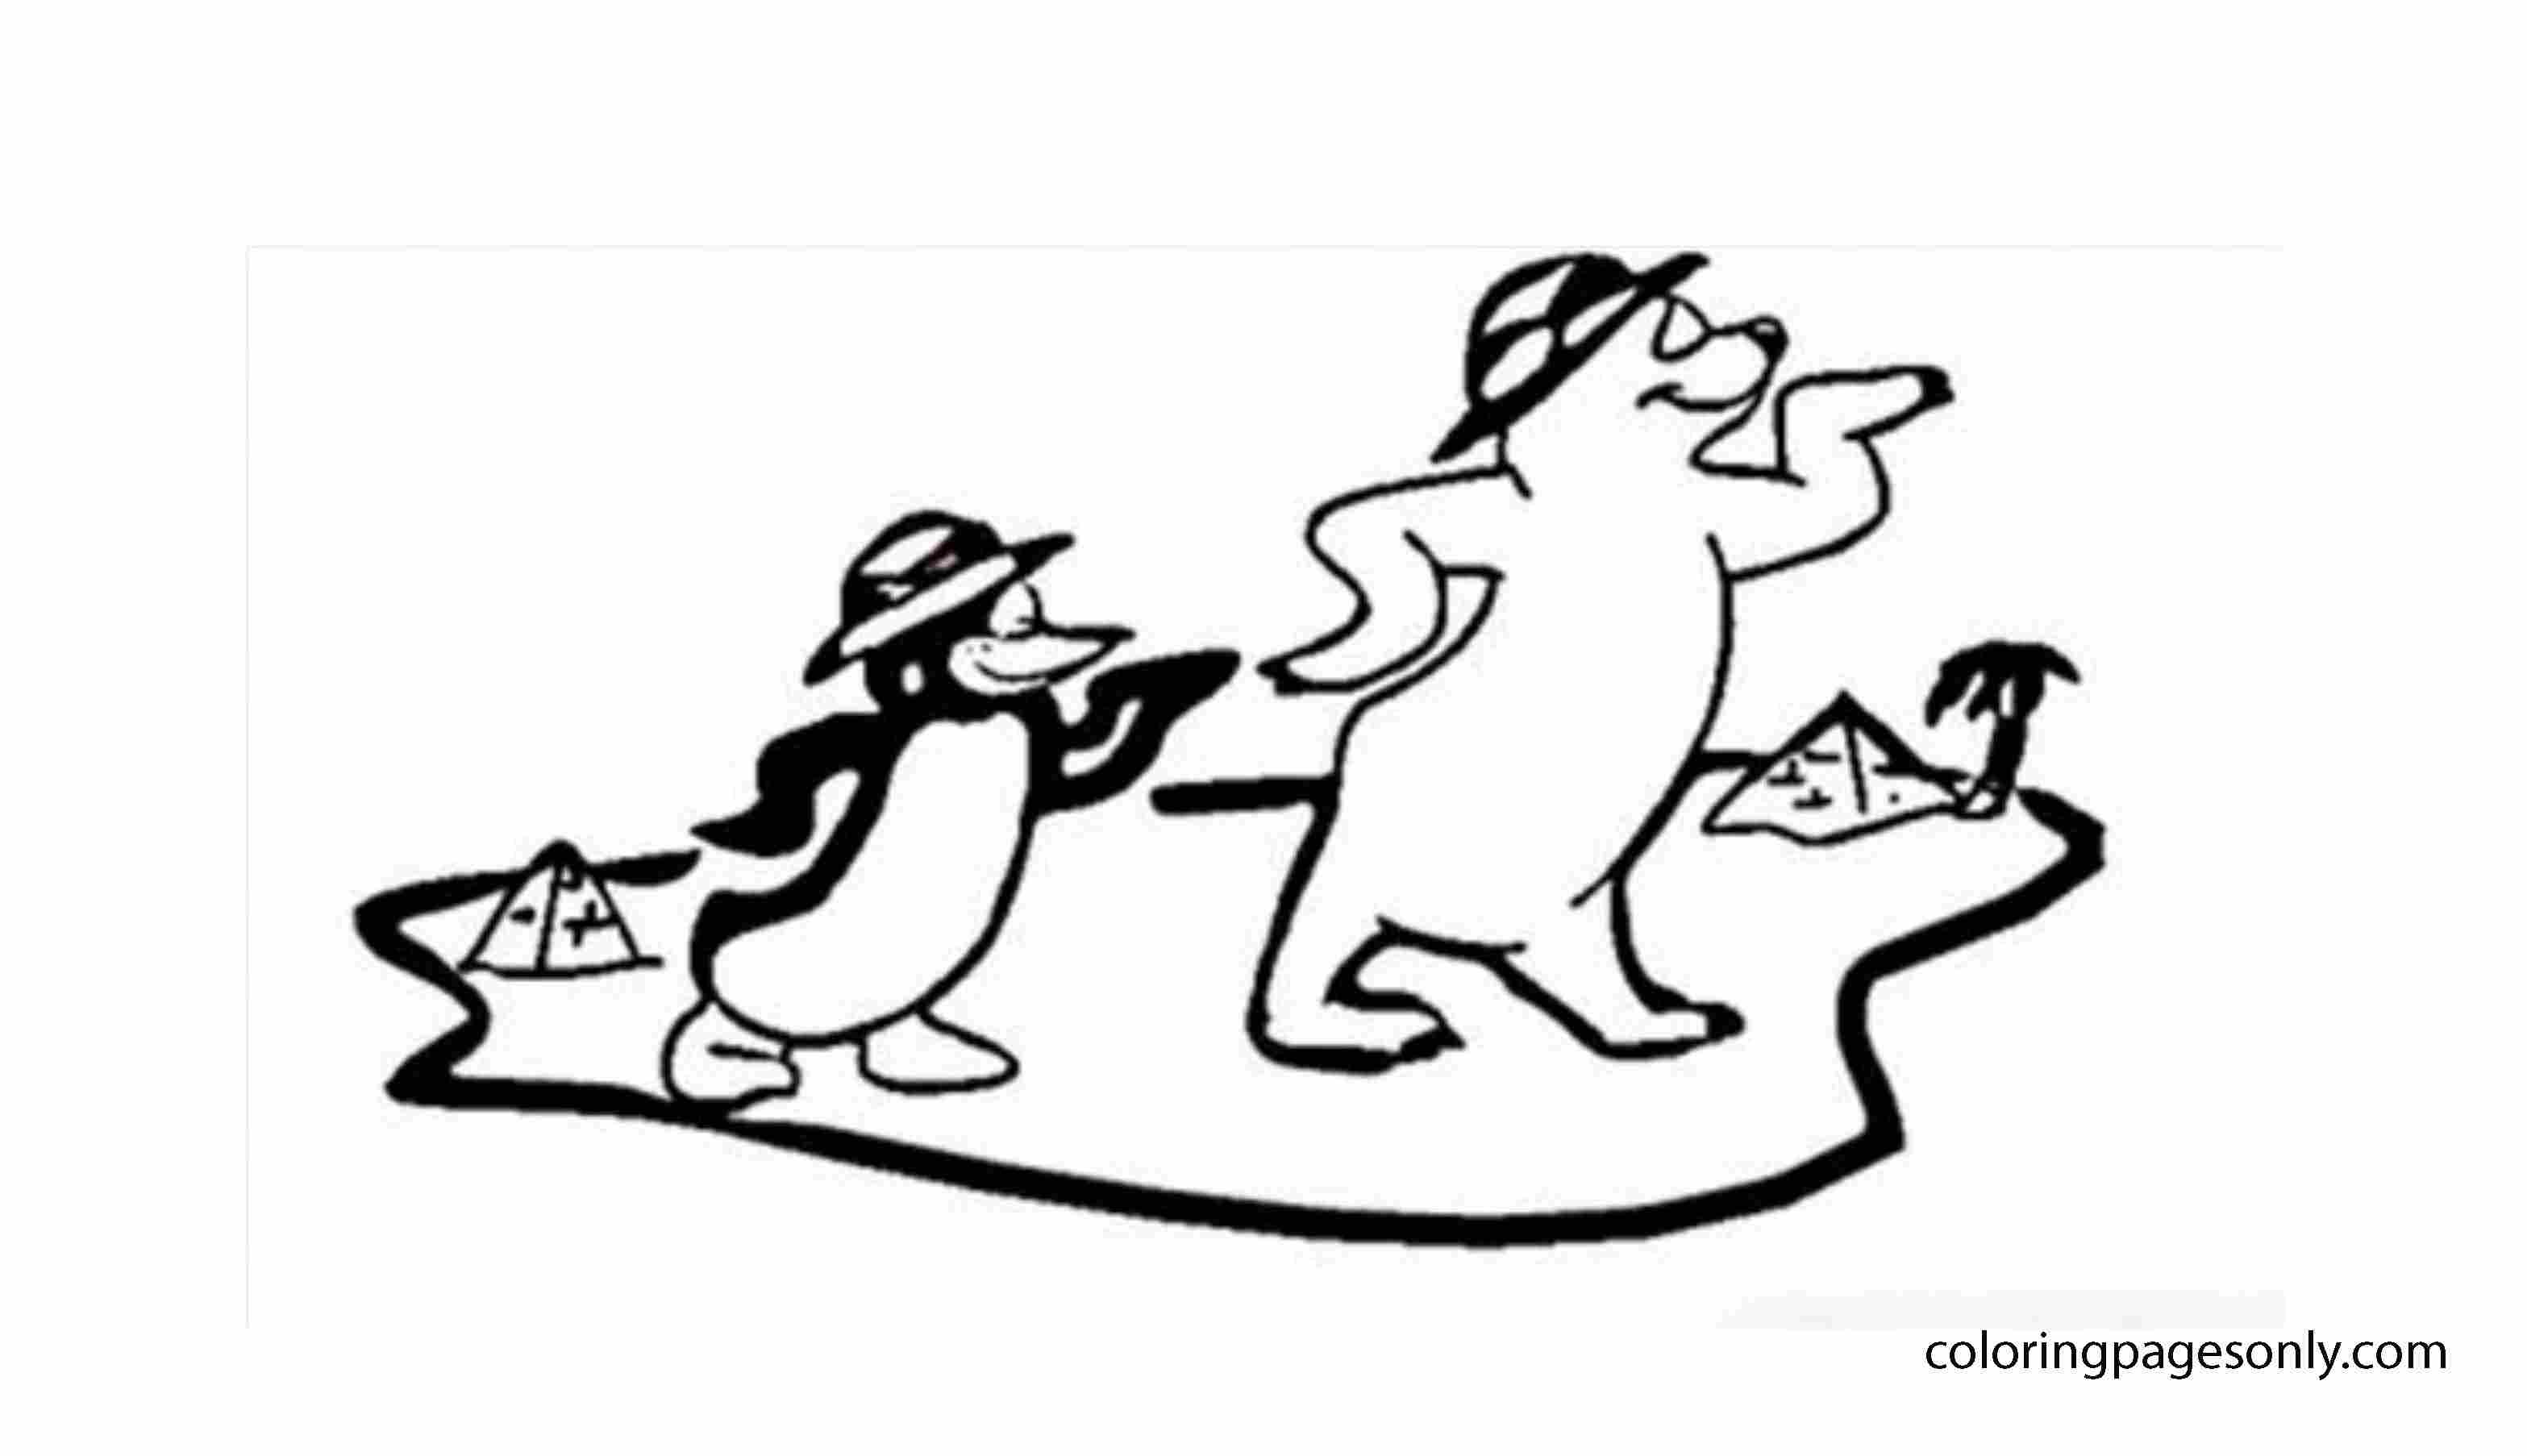 Dancing bear and penguin Coloring Page